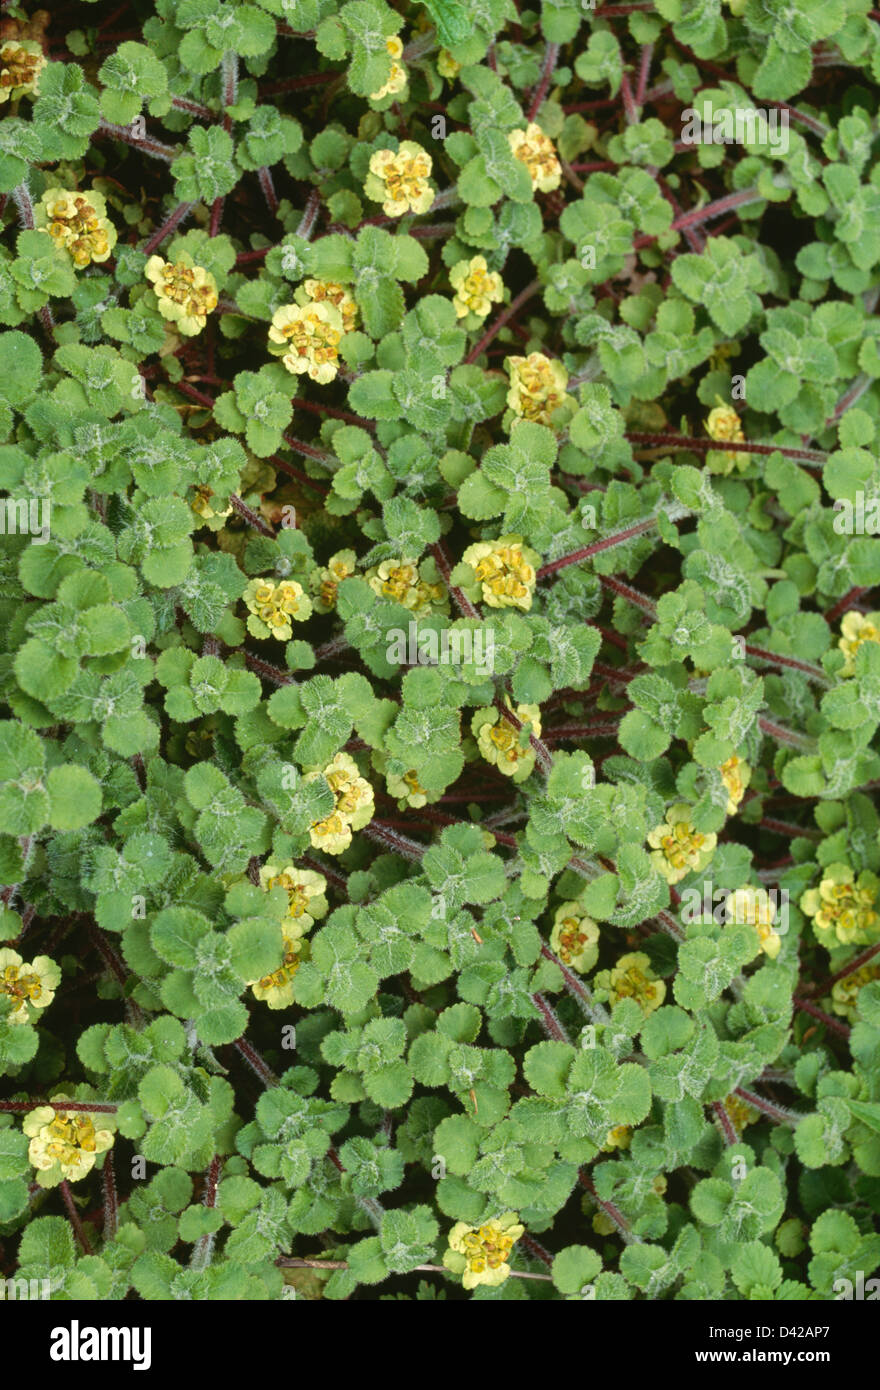 Close-up of small green ground cover plant with yellow flowers Stock Photo